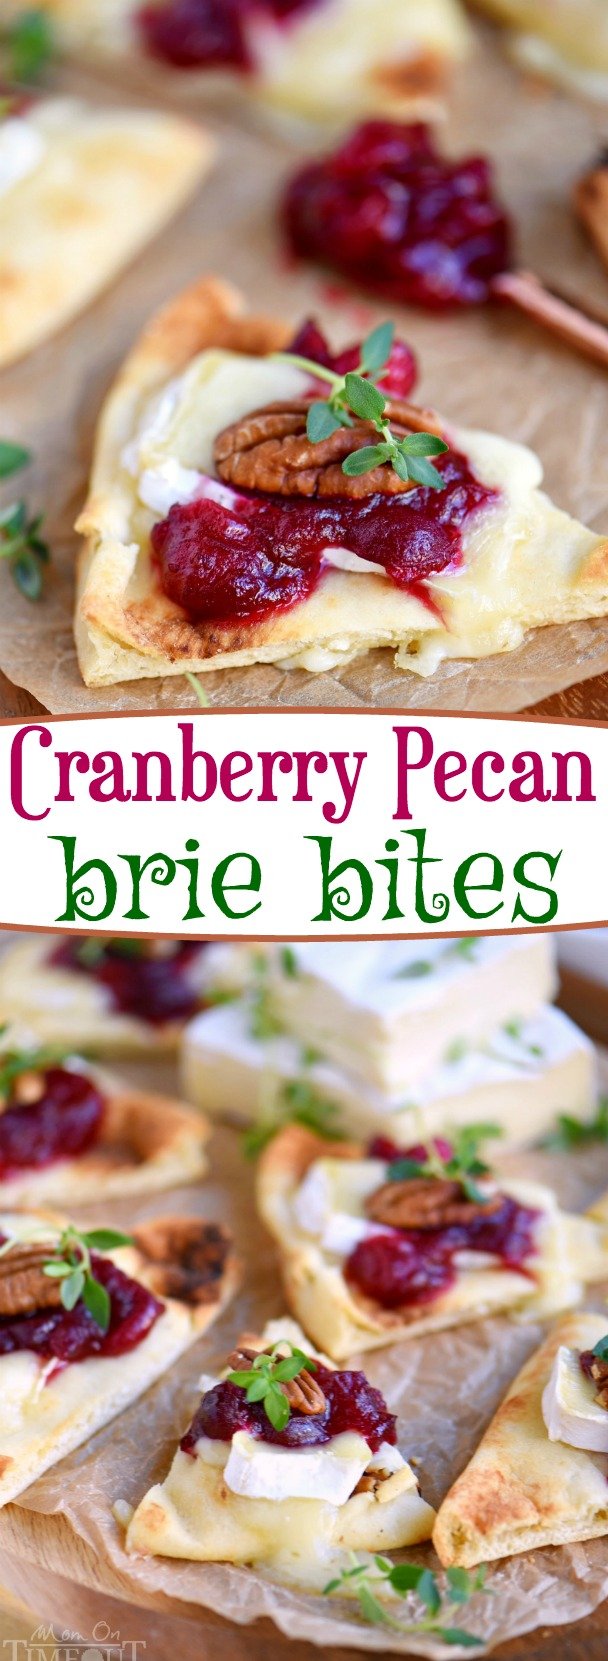 These Cranberry Pecan Brie Bites are perfect for holiday entertaining! Whether you make them for Thanksgiving, Christmas, or New Year's, no one will be able to resist the gooey melted brie, tart cranberry sauce, and toasted pecan atop a piece of naan! Easy and fabulous - just what holiday entertaining should be! // Mom On Timeout